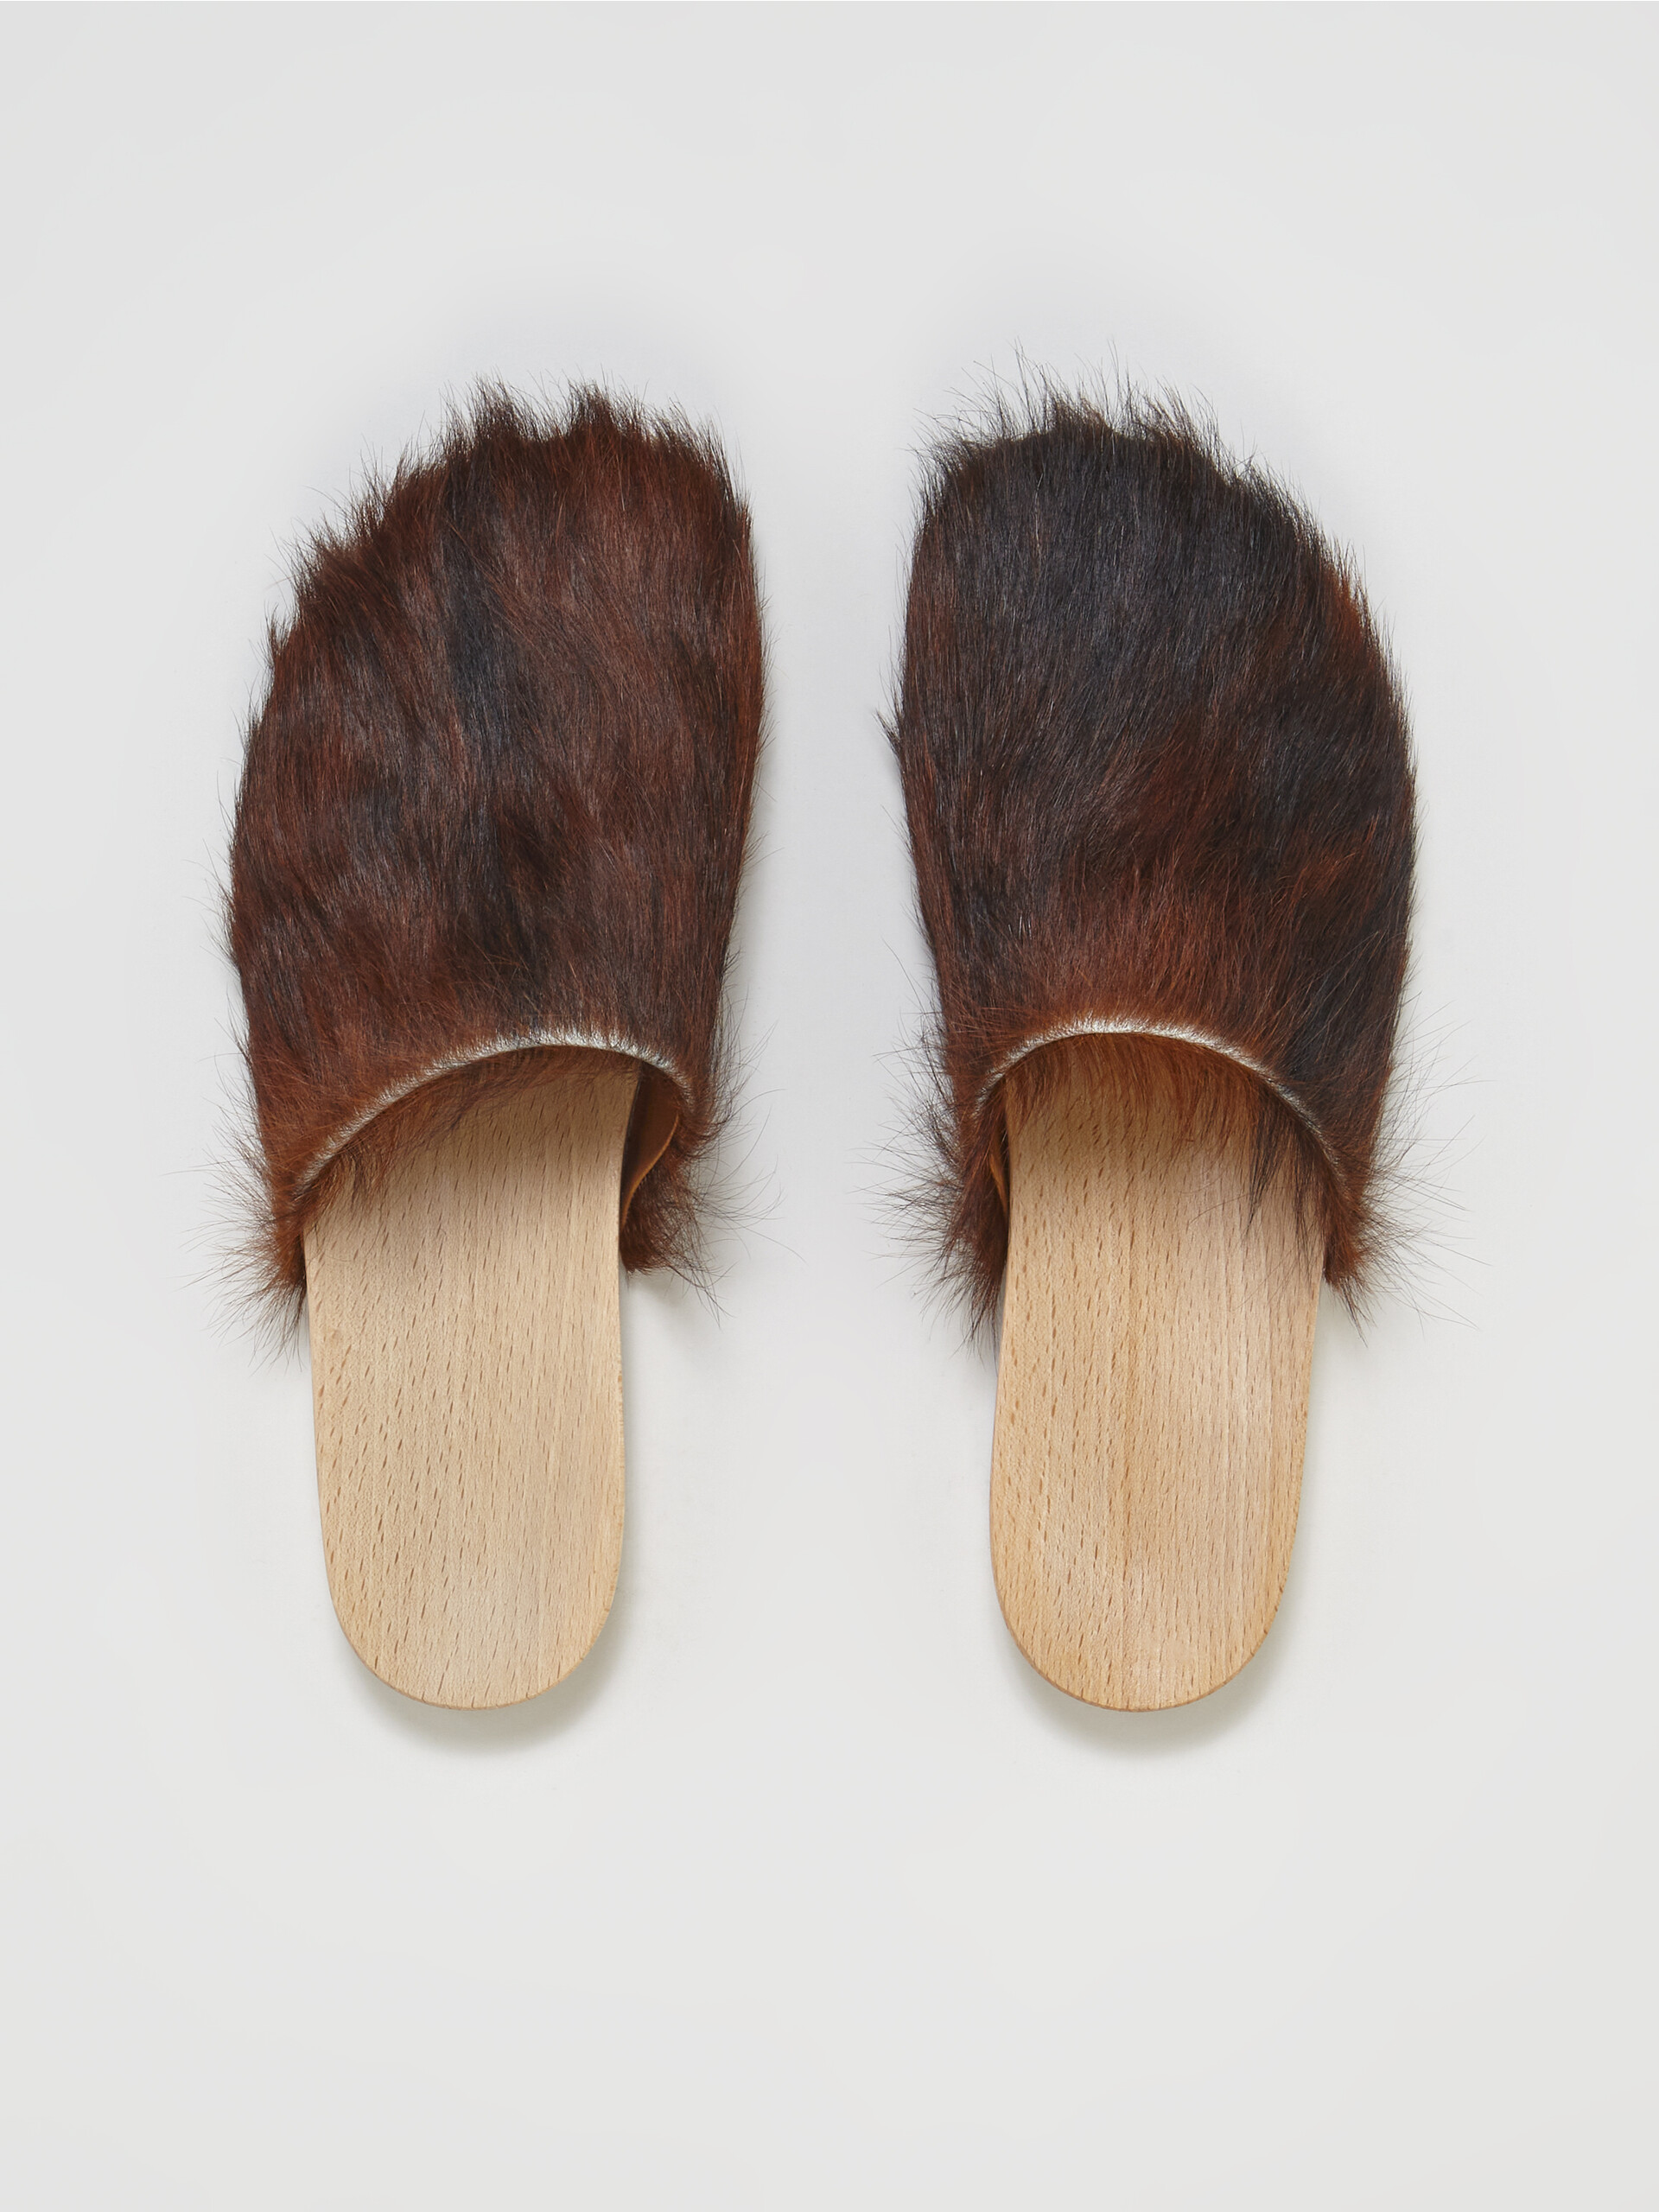 Spotted long calf hair wood sabot - Clogs - Image 4